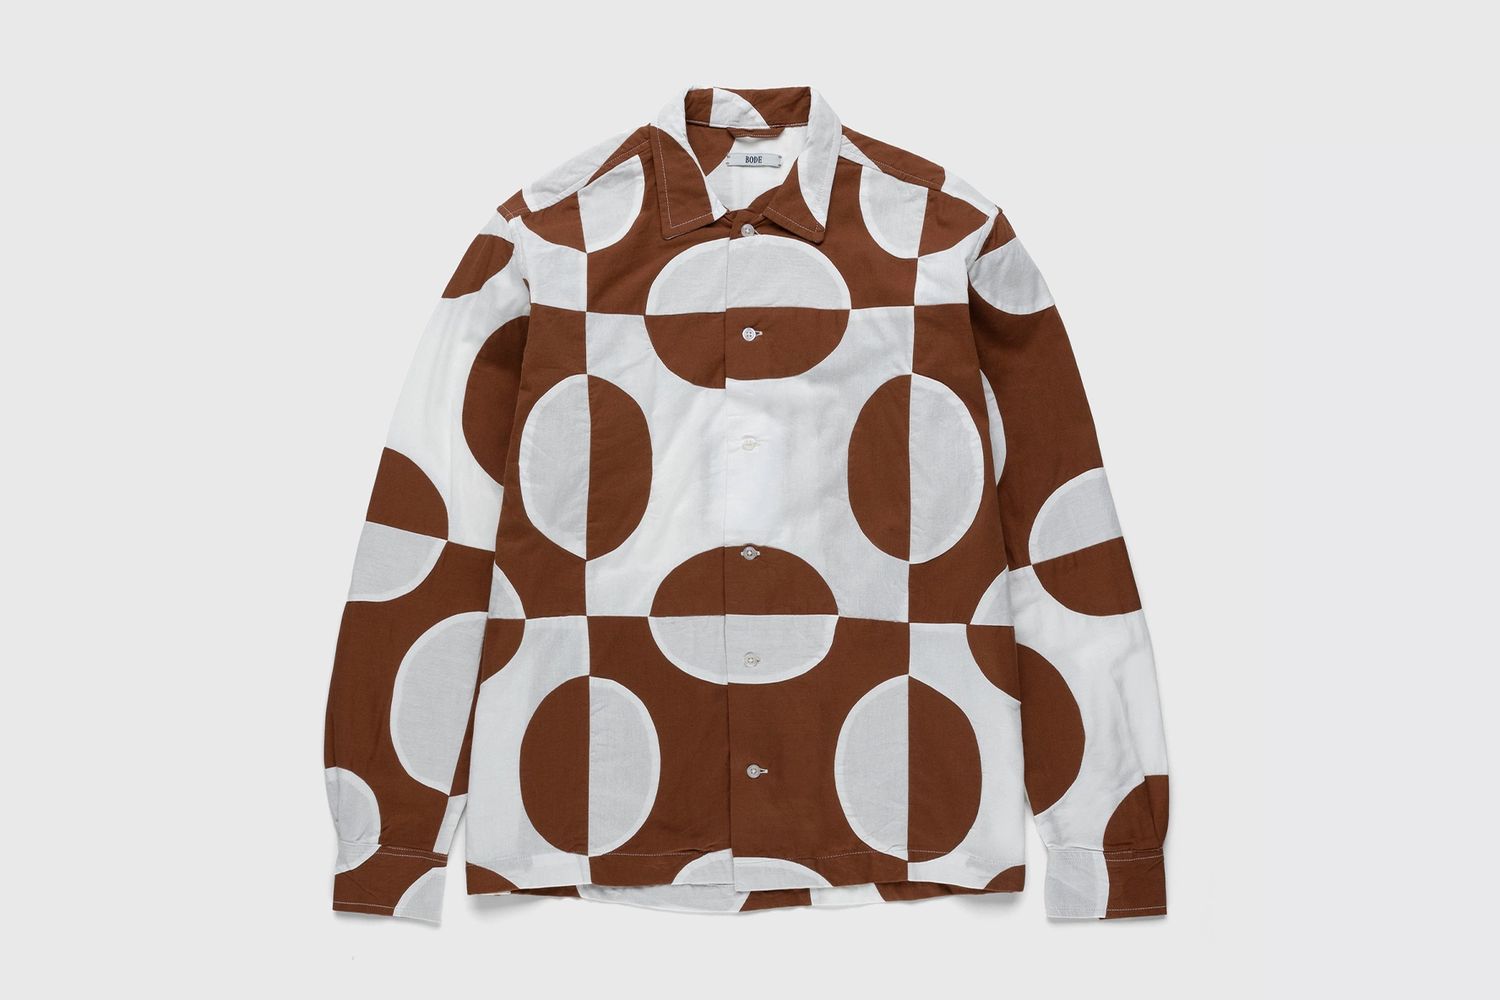 Duo Oval Patchwork Long-Sleeve Shirt